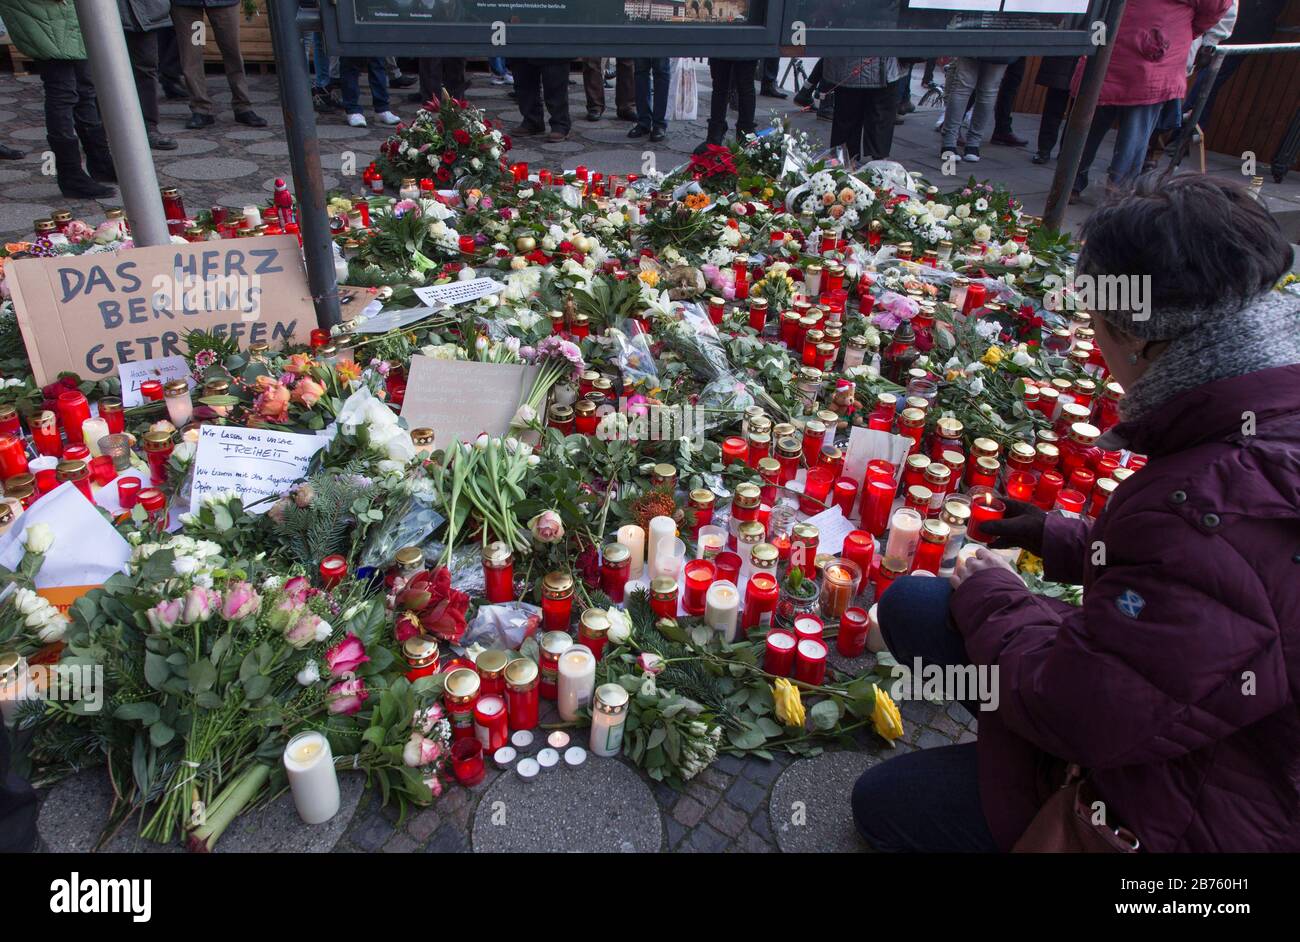 A woman is lighting a candle at the Gedaechtniskirche, where many people are laying flowers in memory of the victims of the terrorist attack on Breitscheidplatz. [automated translation] Stock Photo